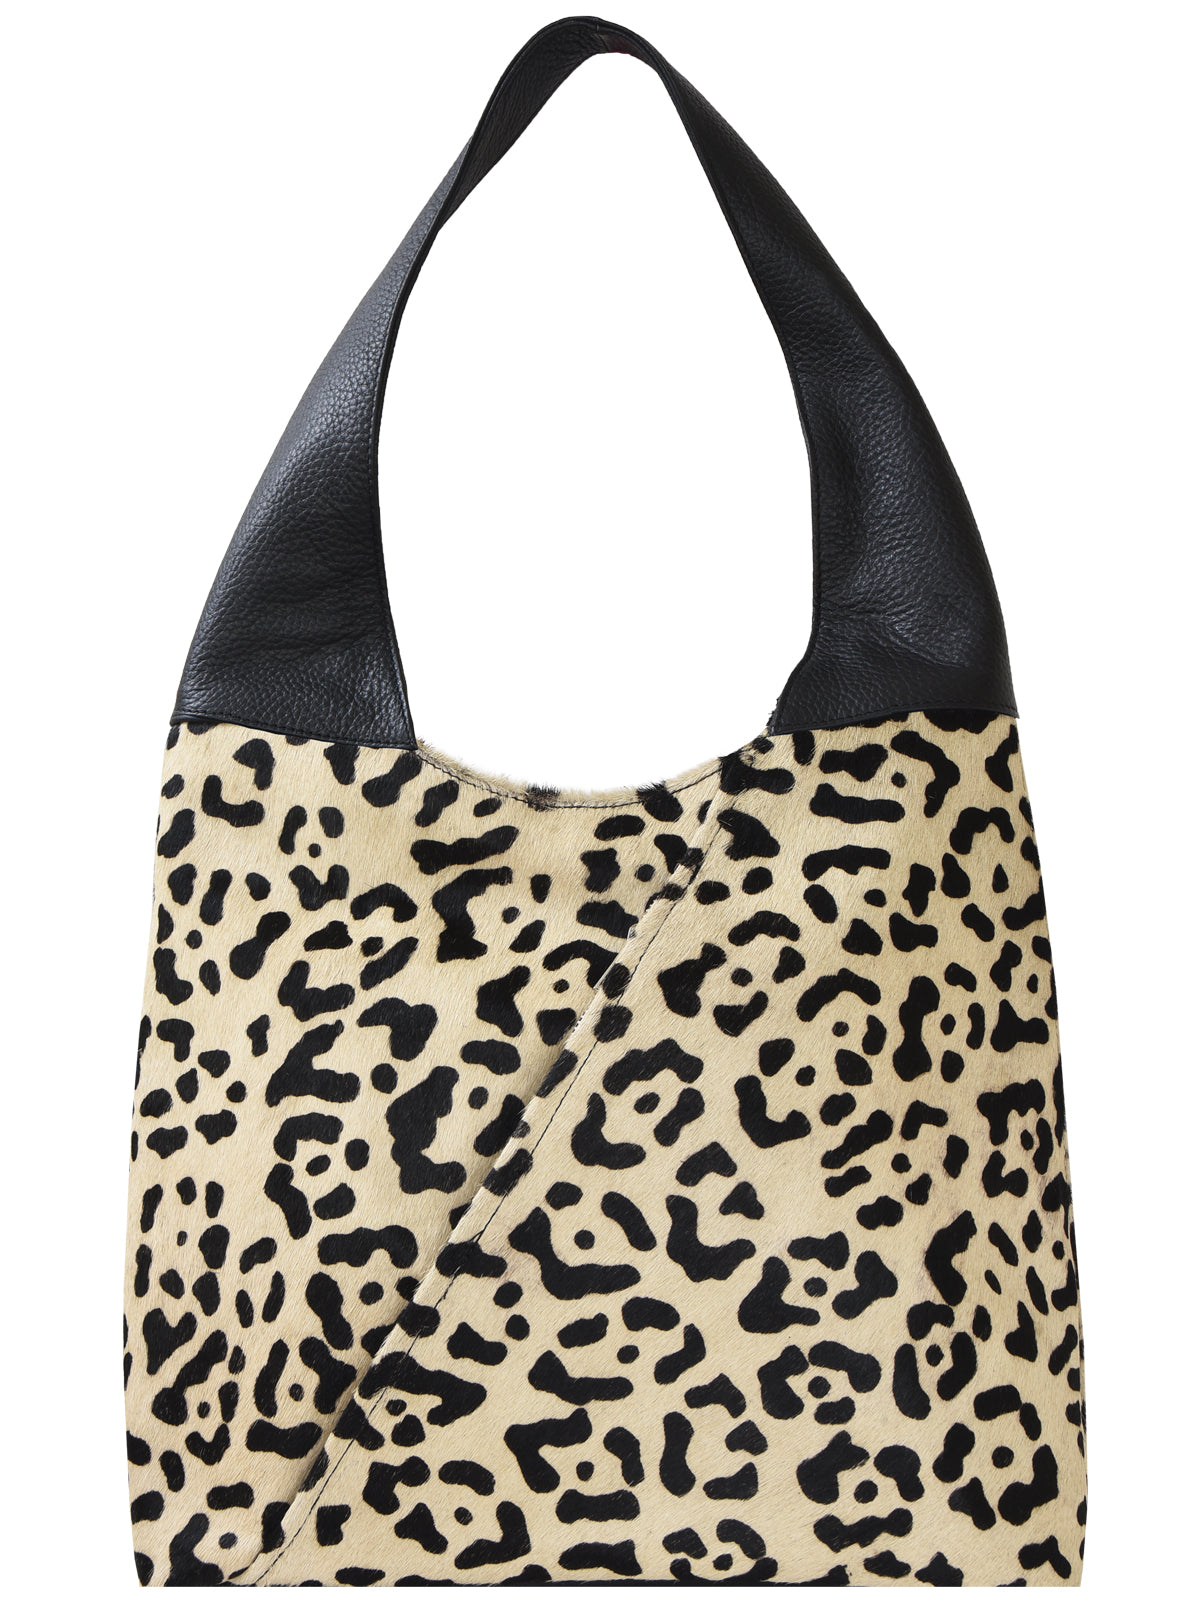 Ivory Leopard Print Leather Shoulder Hobo Bag Brix Bailey Ethical Sustainable Leather Brand 